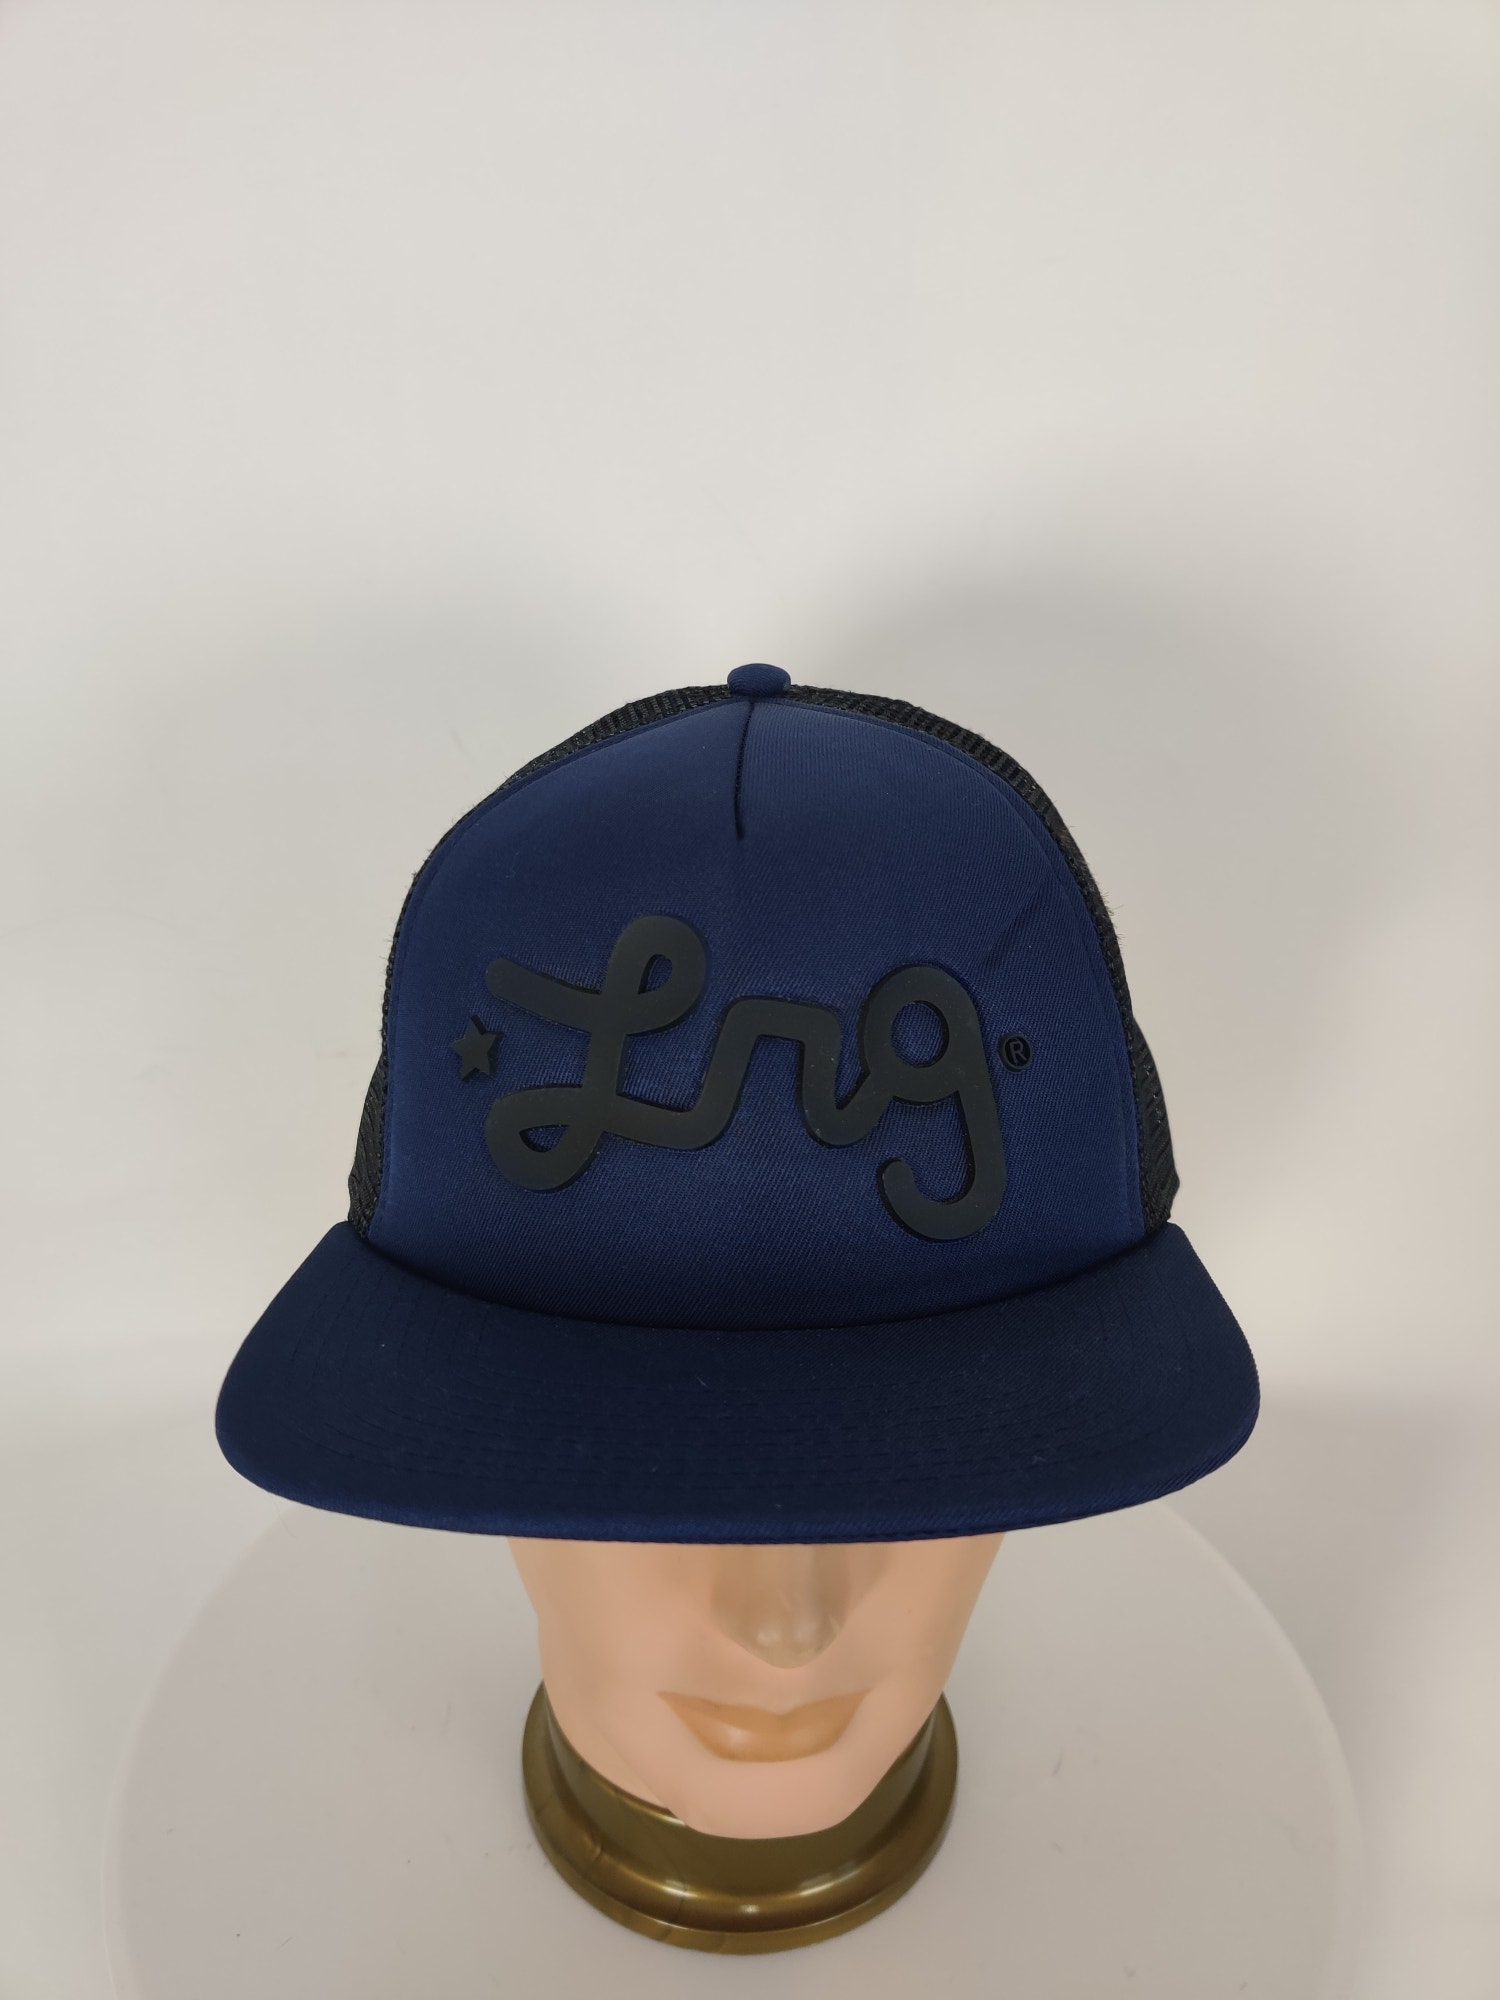 (V) ORIGINAL LRG Unisex hat hiking casual mesh back navy One size  - Picture 1 of 11